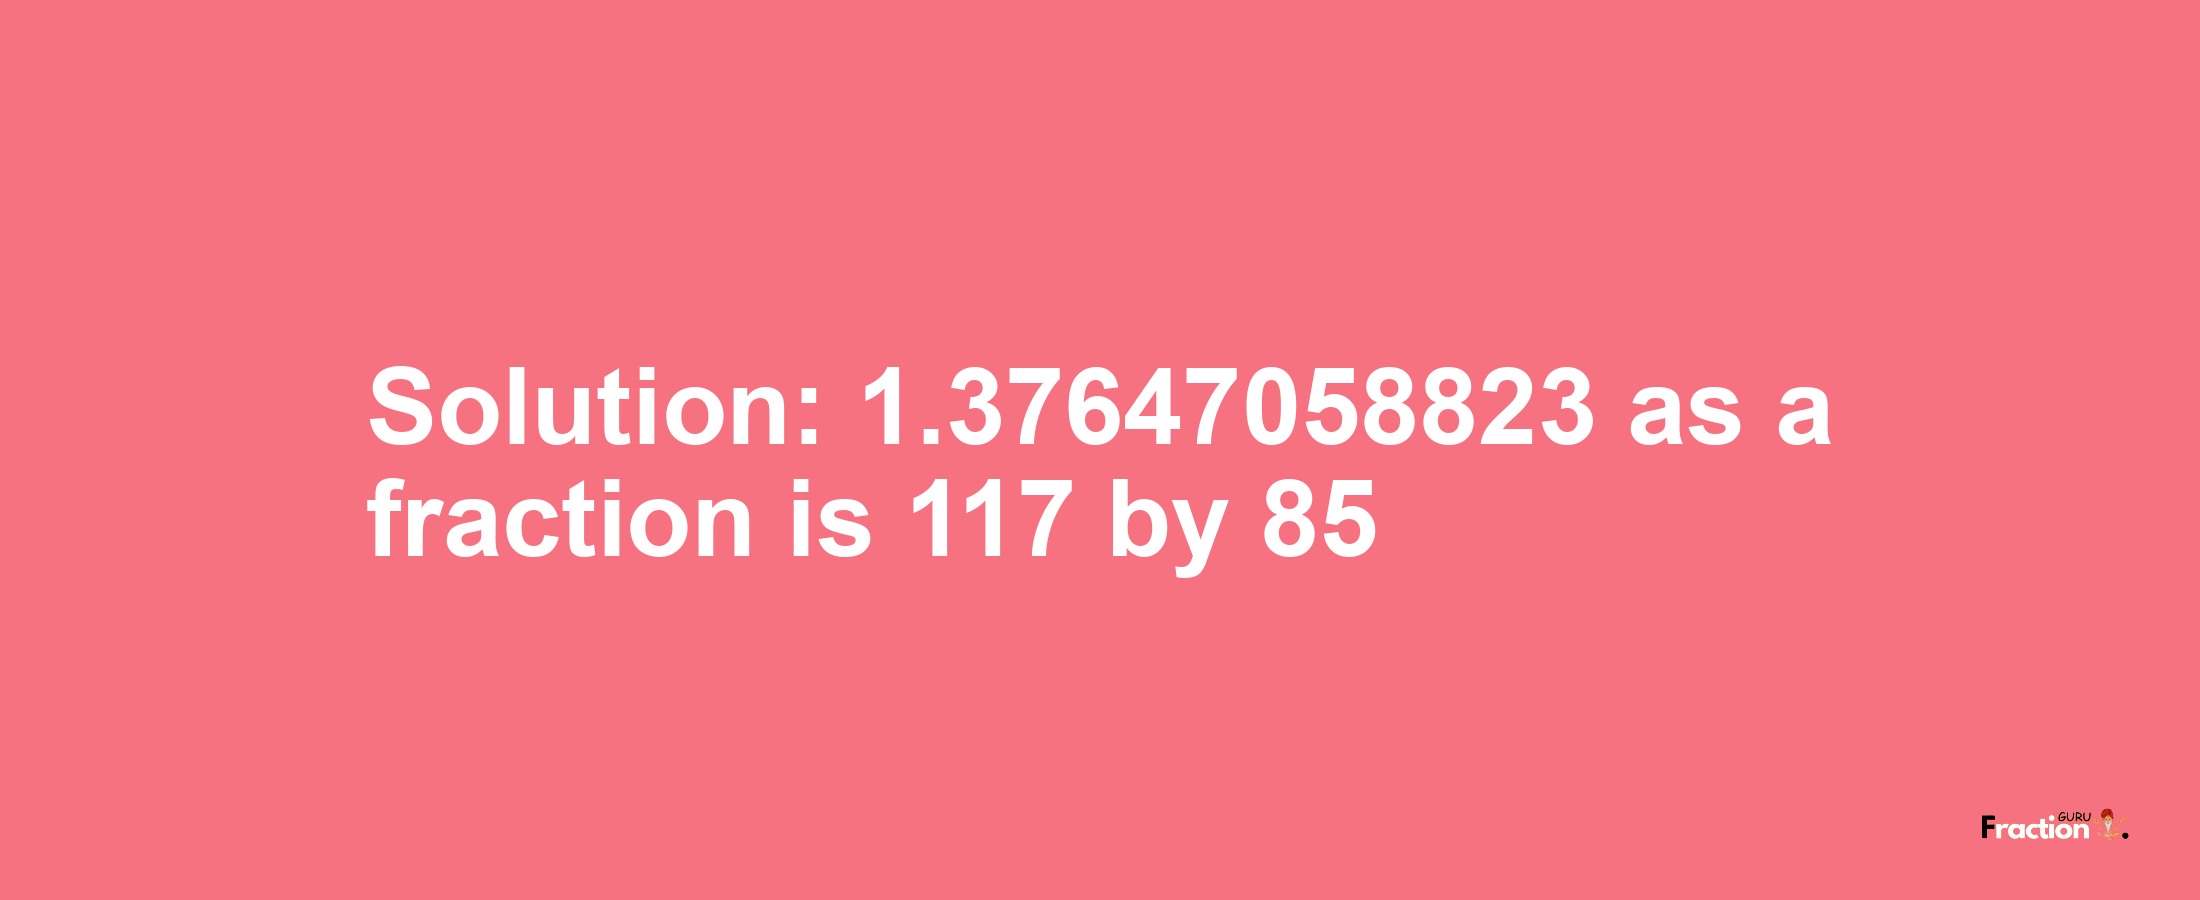 Solution:1.37647058823 as a fraction is 117/85